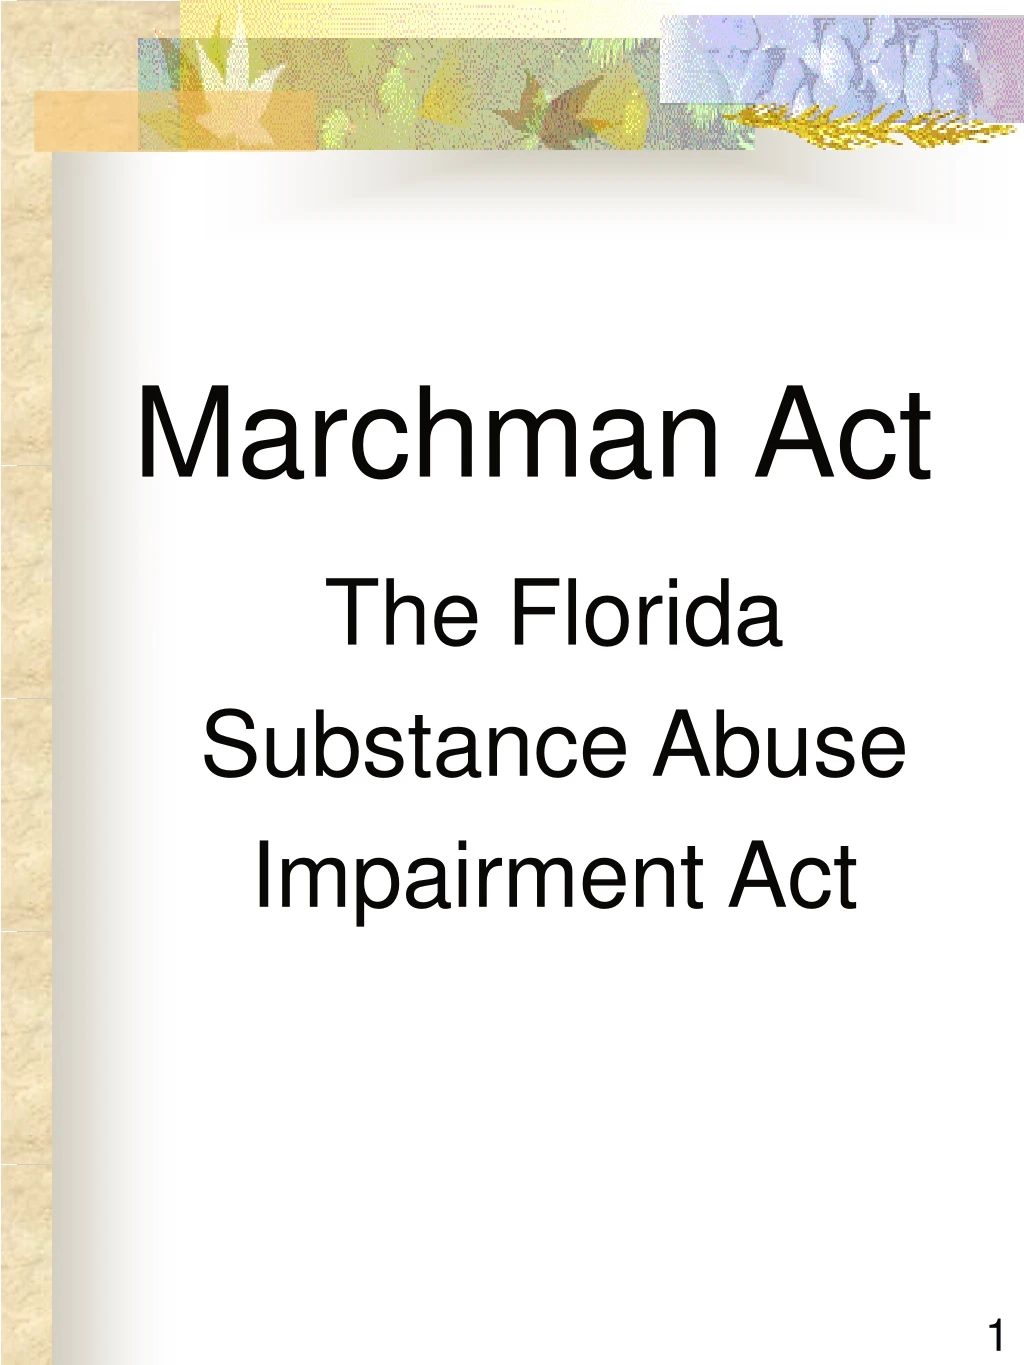 marchman act